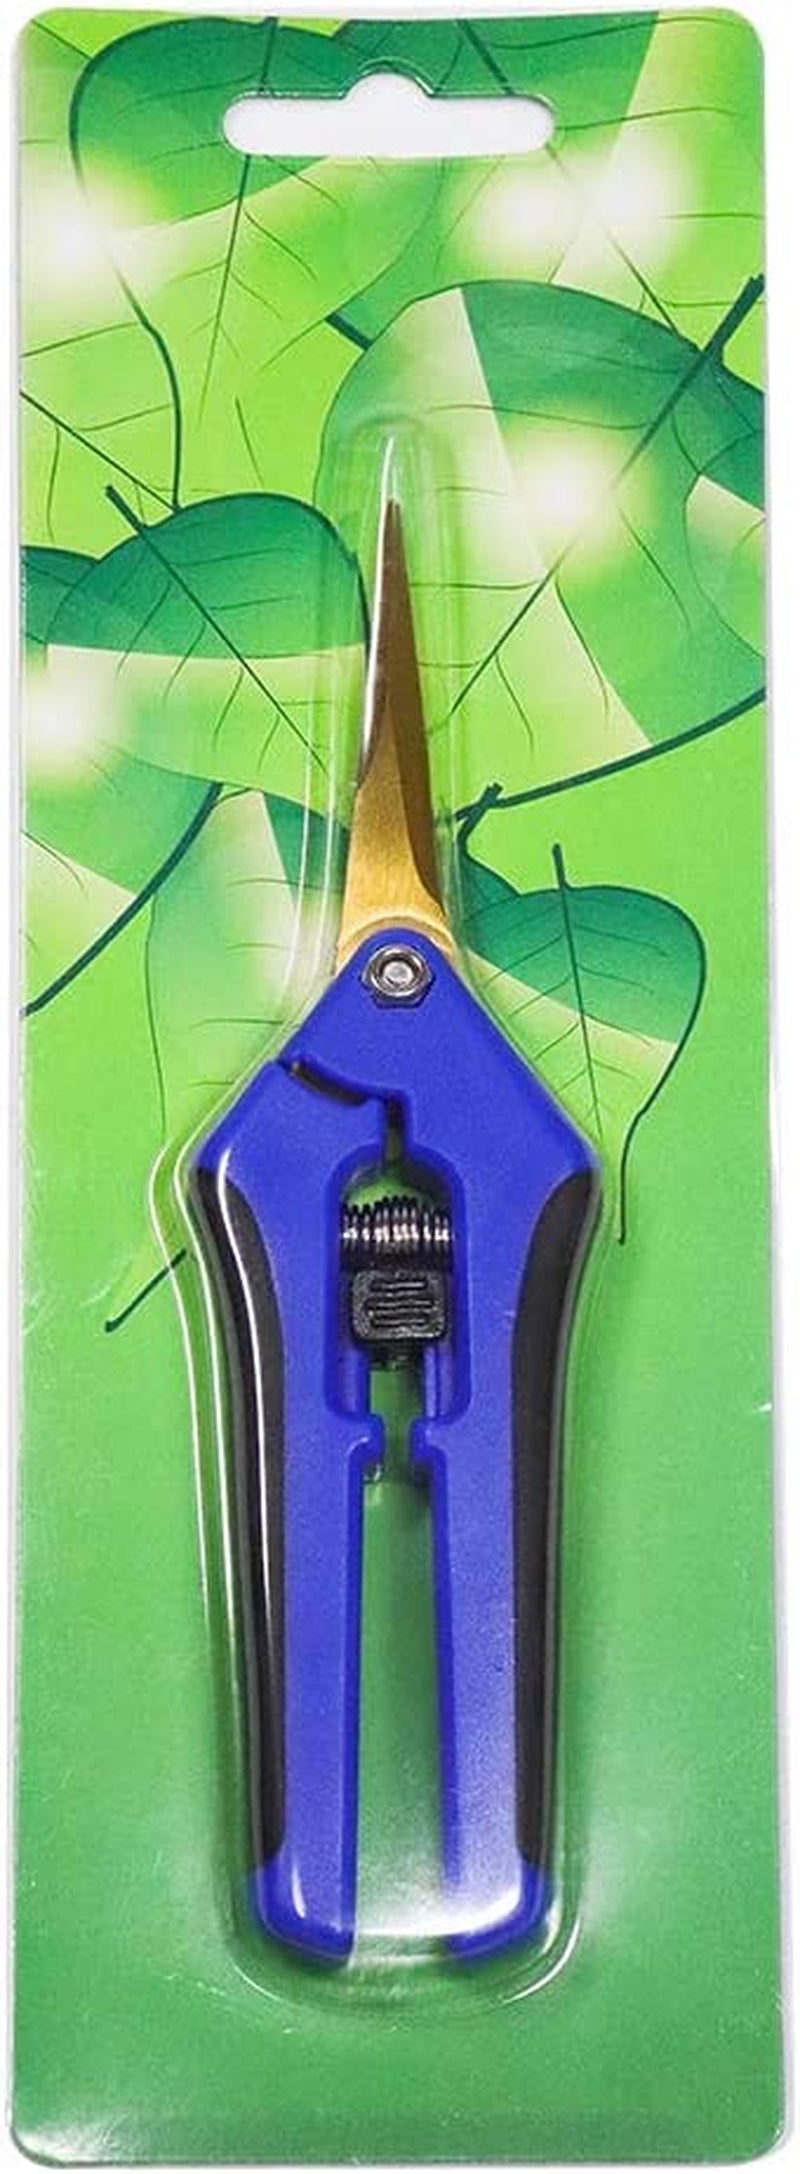 Valuehall Pruning Shears Gardening Hand Pruning Snips Soft Grip Pruner Professional Hand Pruners Curved Blades for Garden Harvesting Hydroponic Crops Fruits Vegetables V7C01